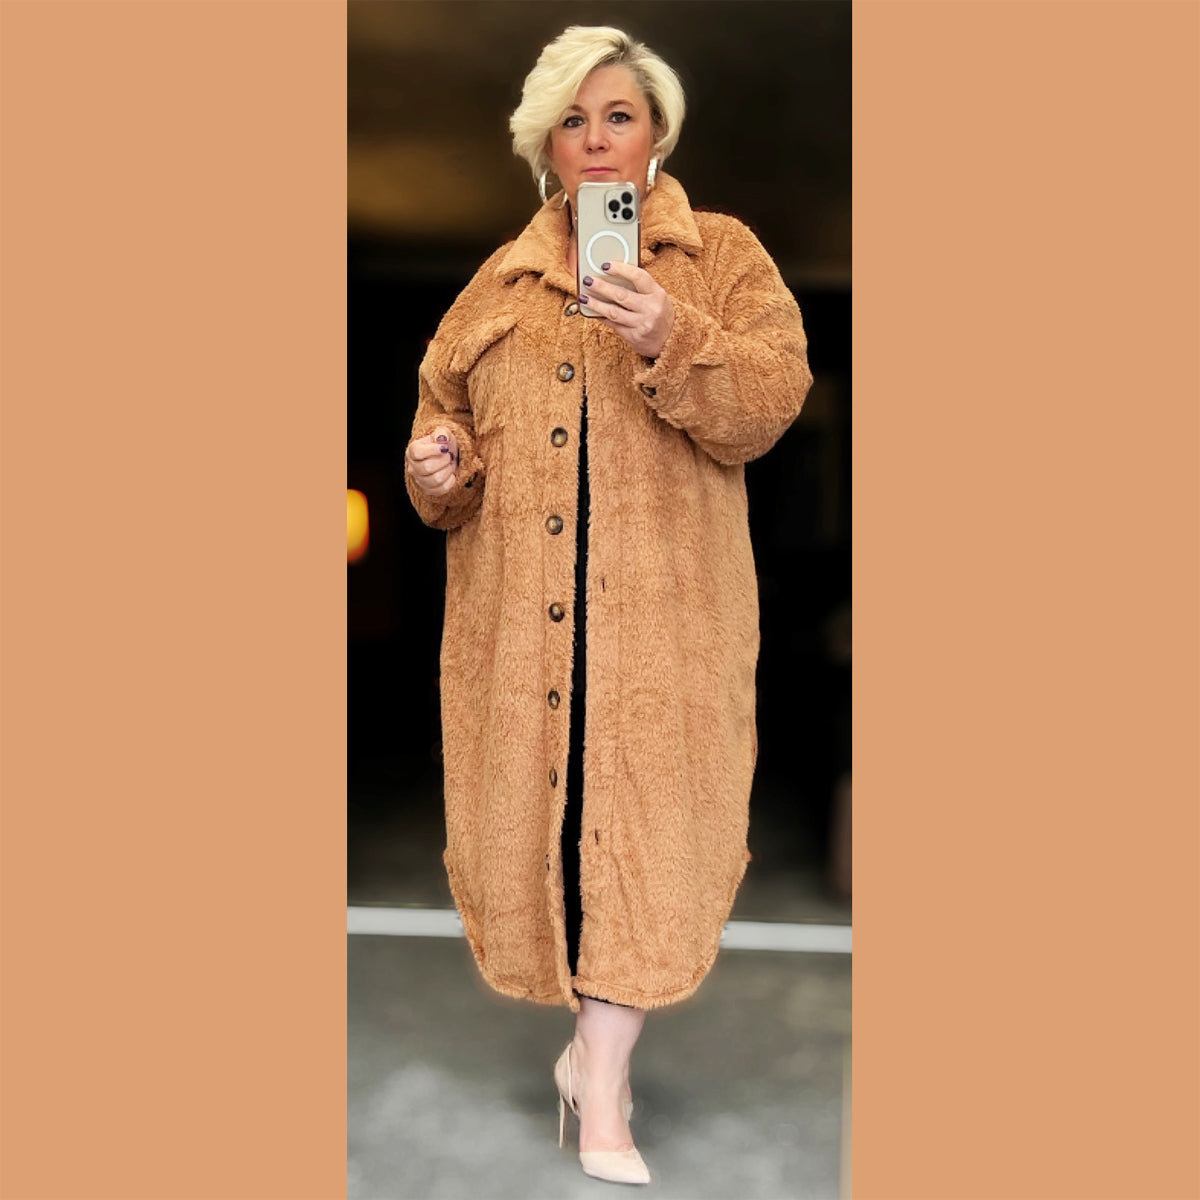 Button Up long Teddy Coat / Jacket Plus Size WITH COLLAR